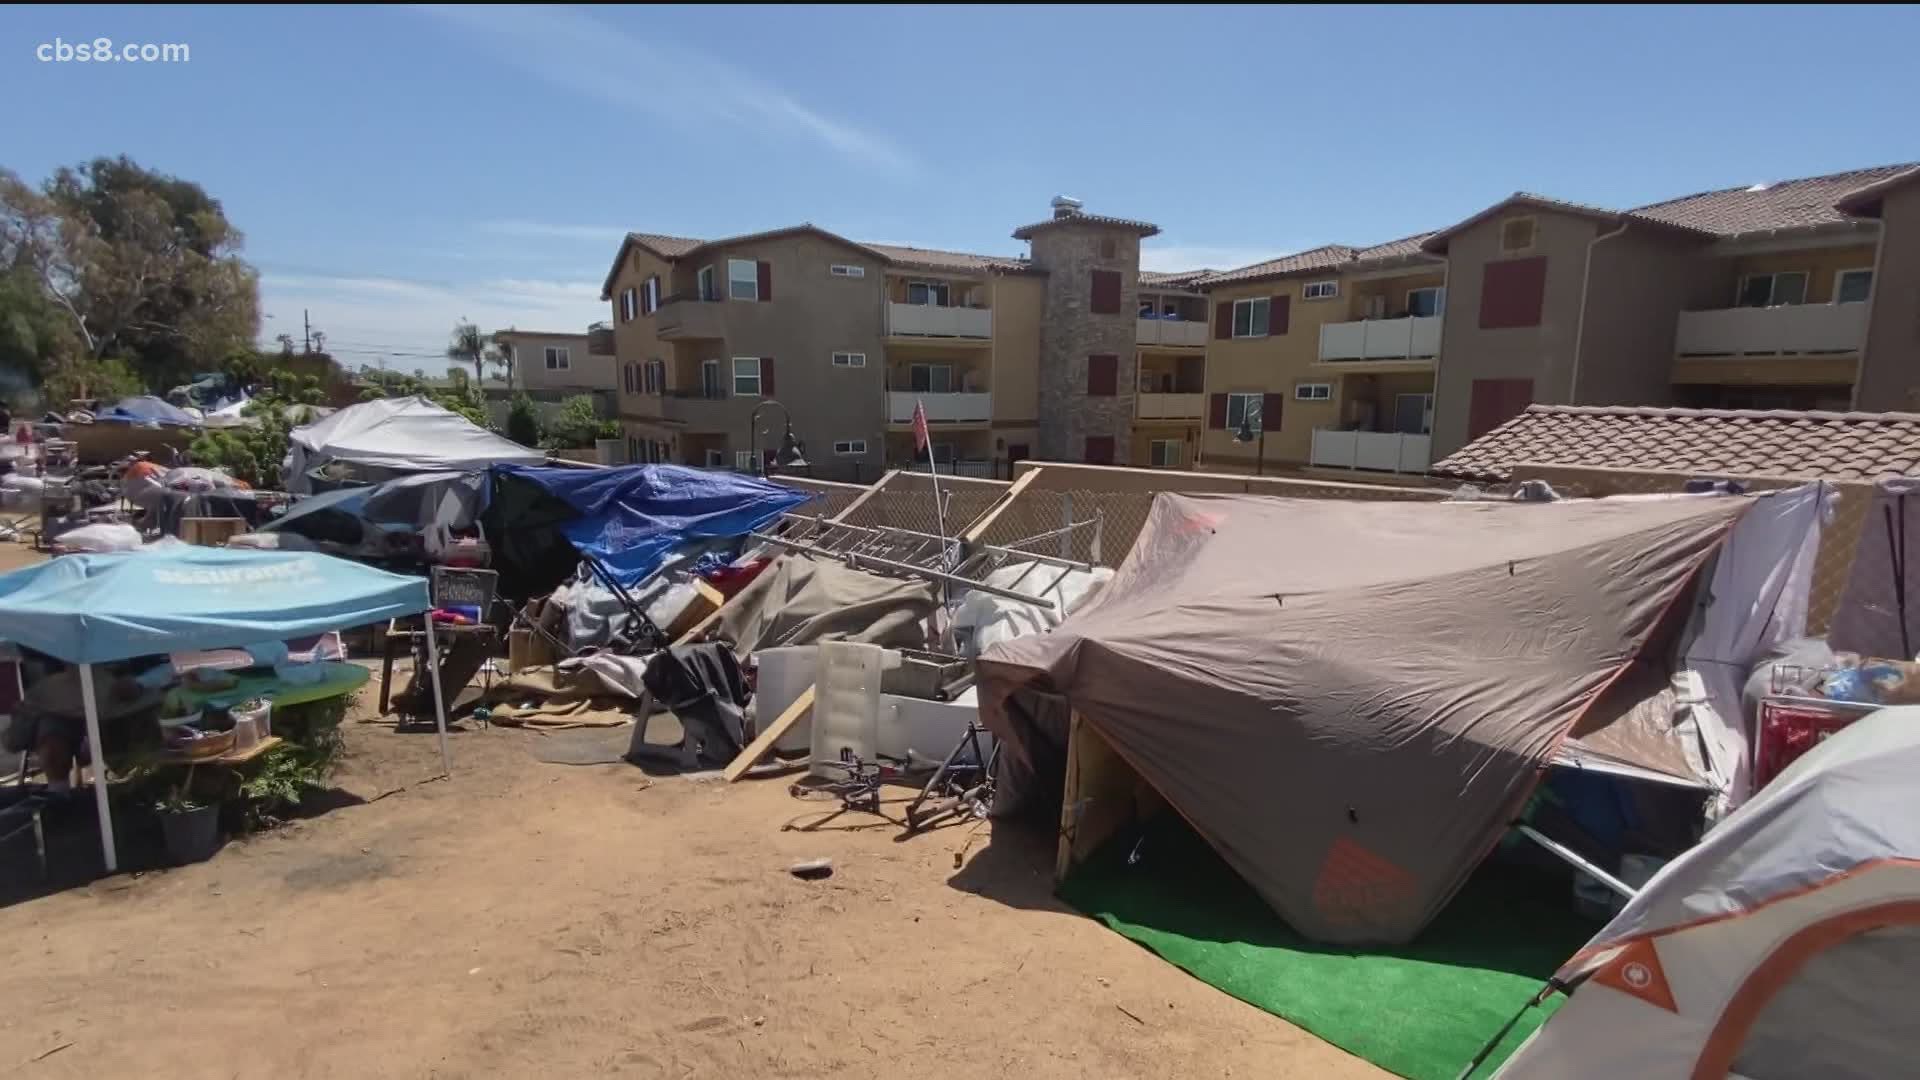 National City residents have complained of a growing homeless encampment along the 805 freeway southbound, where rows of tents and trash are widely visible.